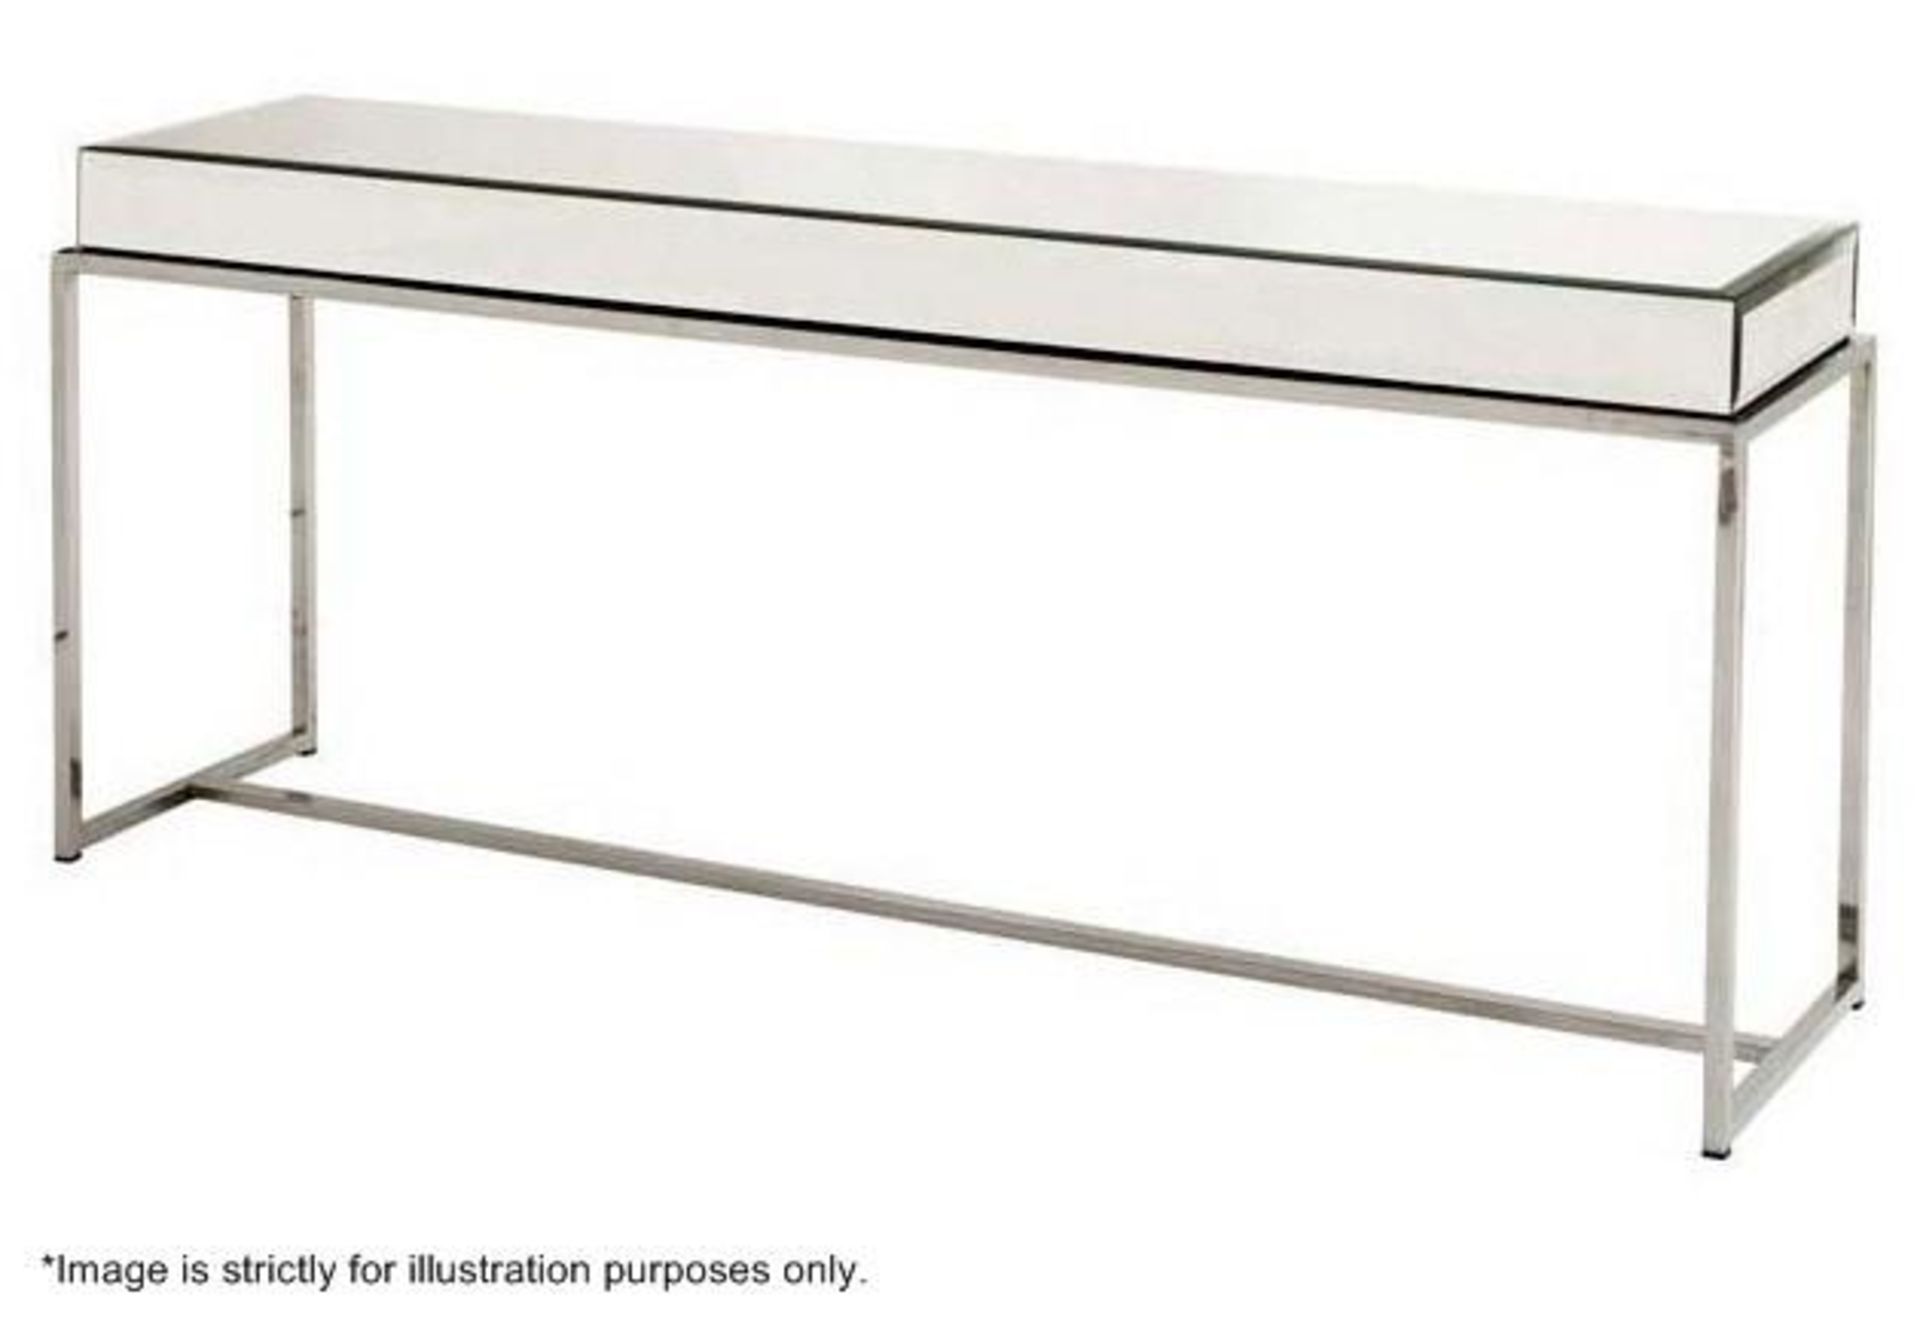 1 x EICHHOLTZ "Beverly Hills" Mirrored Glass Topped Console Table - Dimensions: W160 x D40 x H70 cm - Image 2 of 4